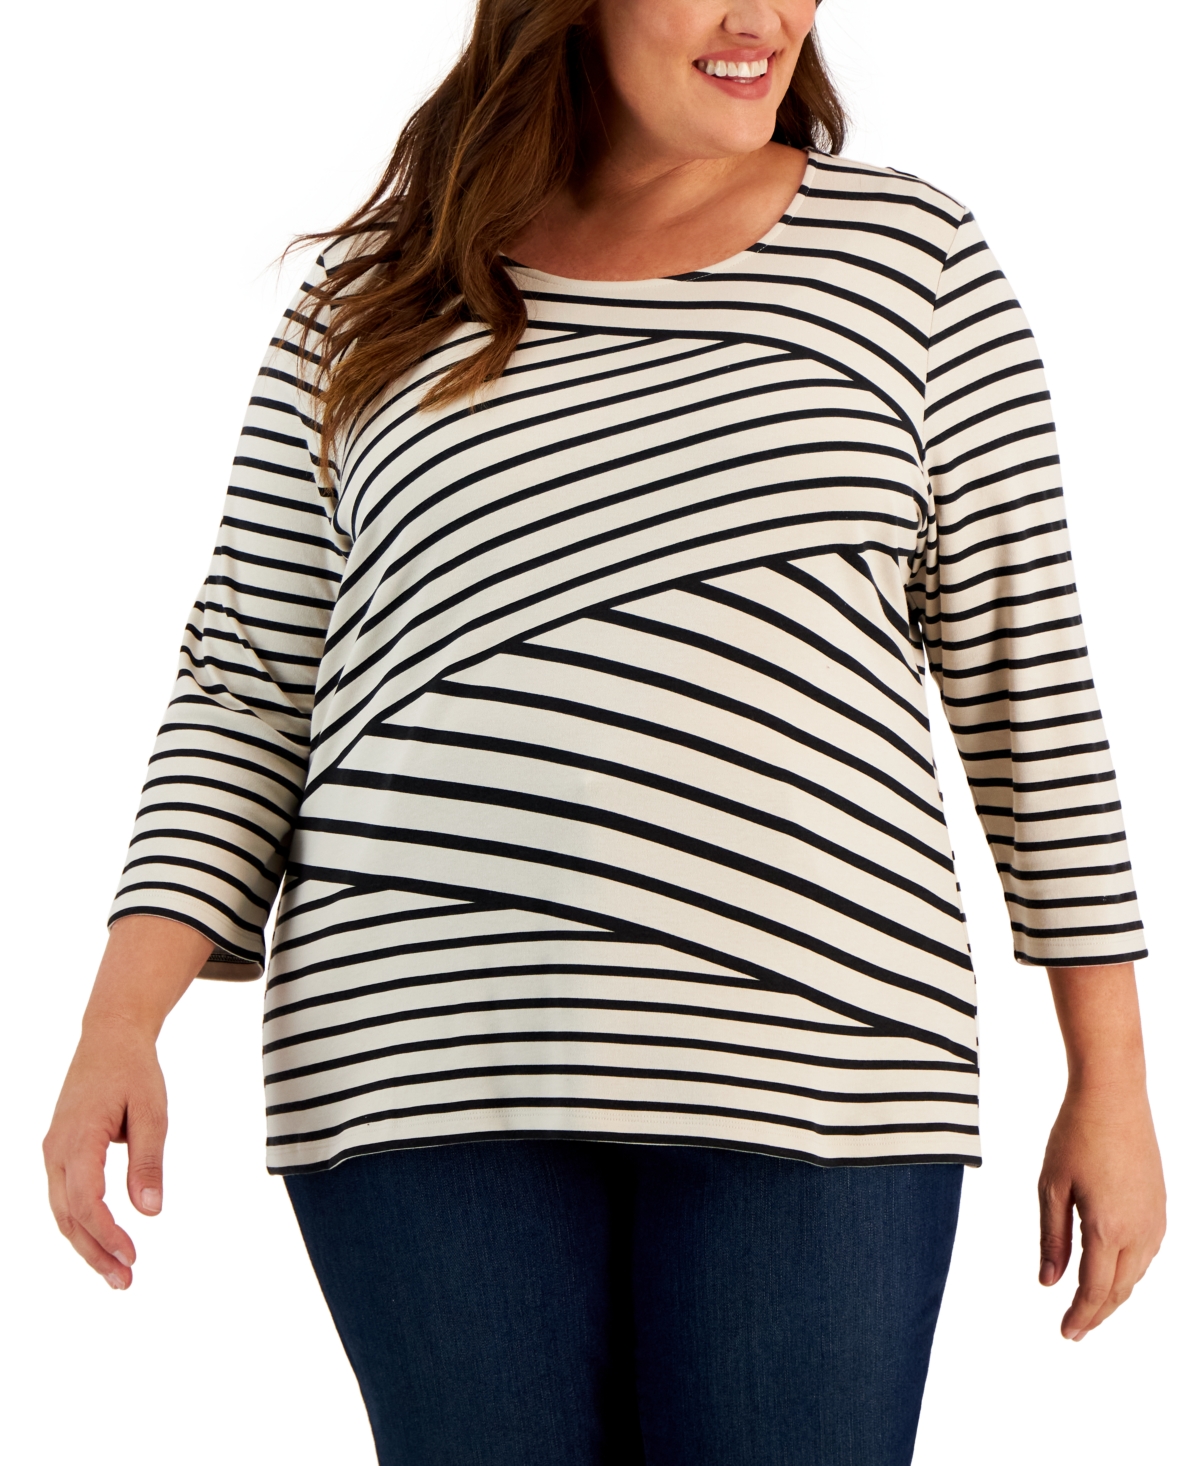 Plus Size 3/4-Sleeve Striped Top, Created for Macy's - Pebble